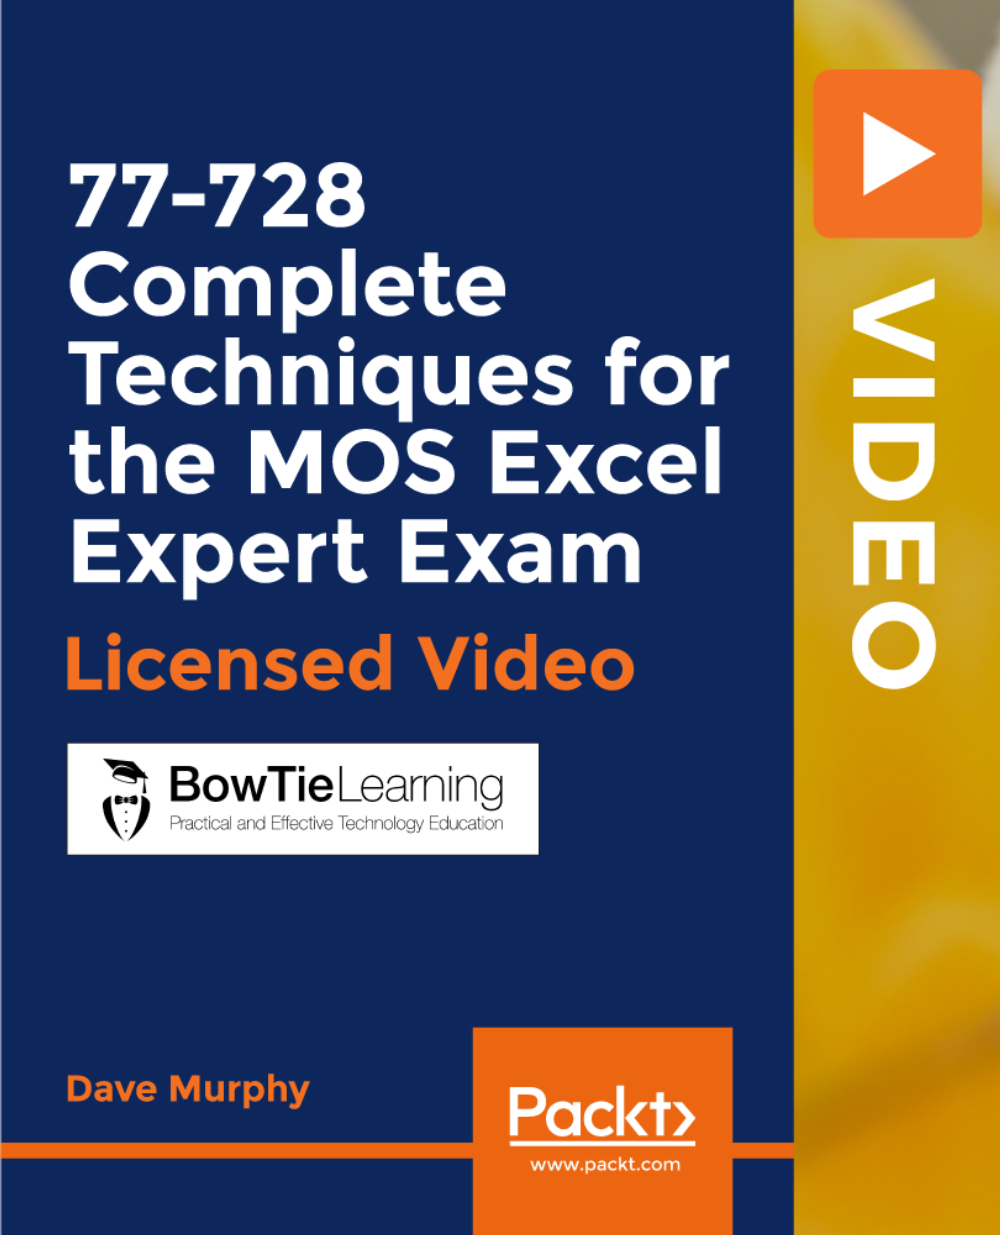 77-728 Complete Techniques for the MOS Excel Expert Exam